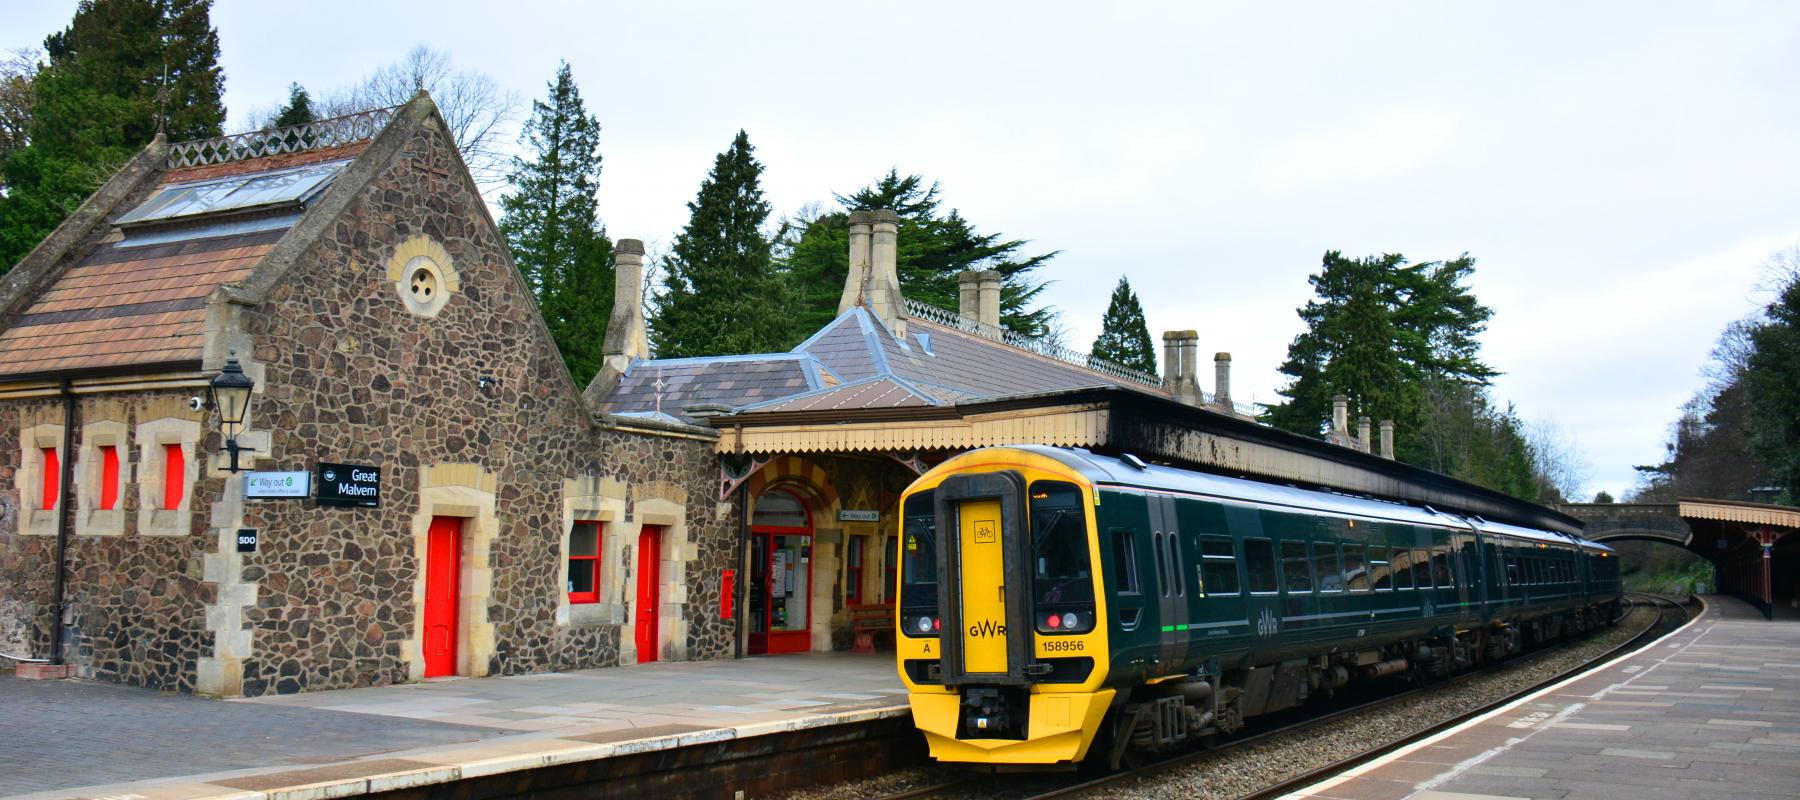 Great Malvern Station along the Cotswold Line